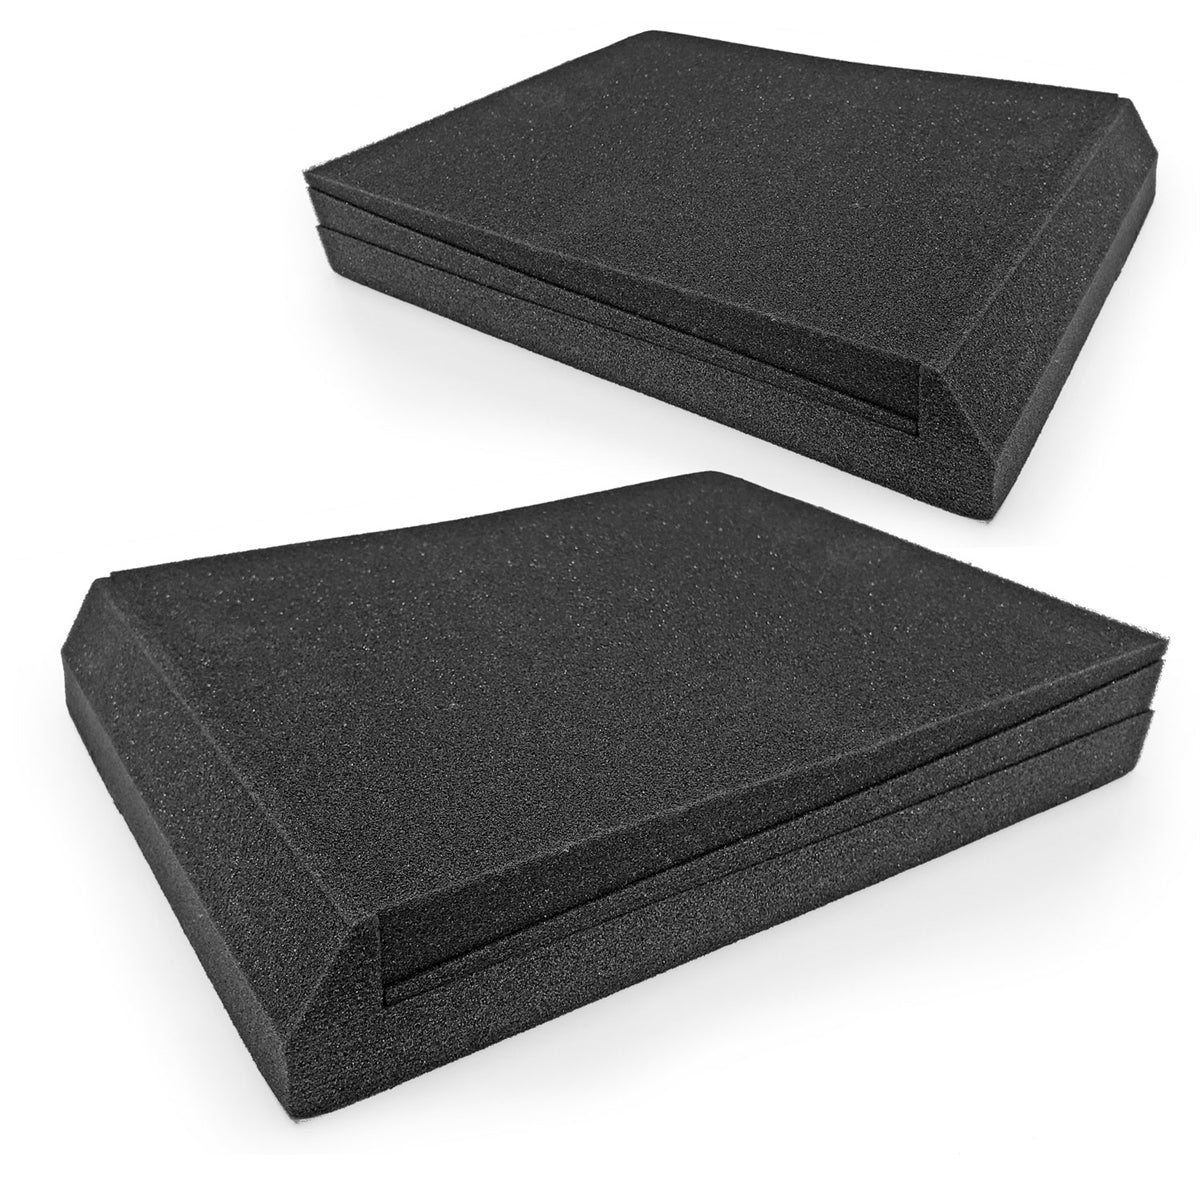 AxcessAbles Large Studio Monitor Isolation Pads for 6.5, 7, and 8-inch Speakers| Sound Isolation Pads for Side-Way Speakers | 3-Slice Pads | Multi-angle Speaker Riser | Acoustic Isolation Speaker Foam - Open Box